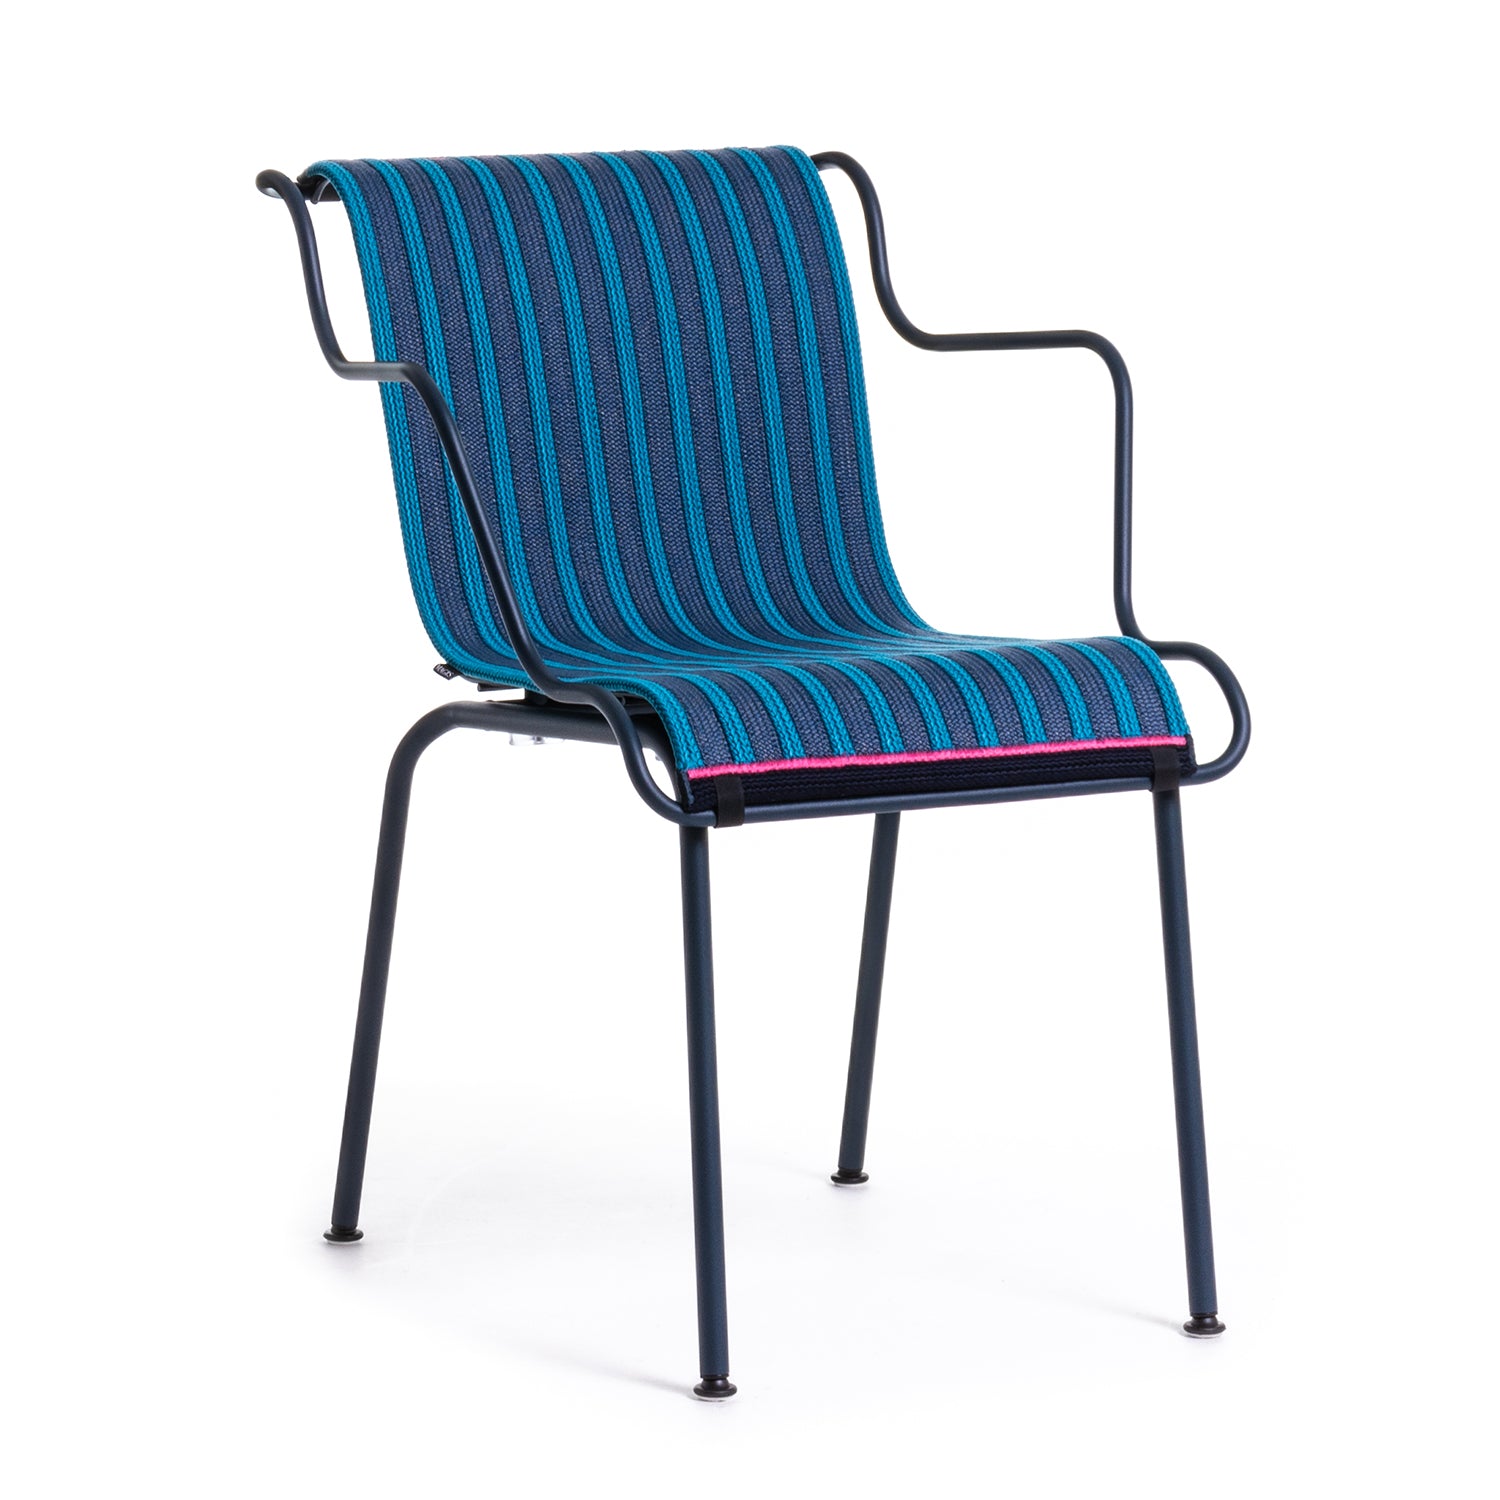 Magis South Dining Armchair in dark blue with seatpad